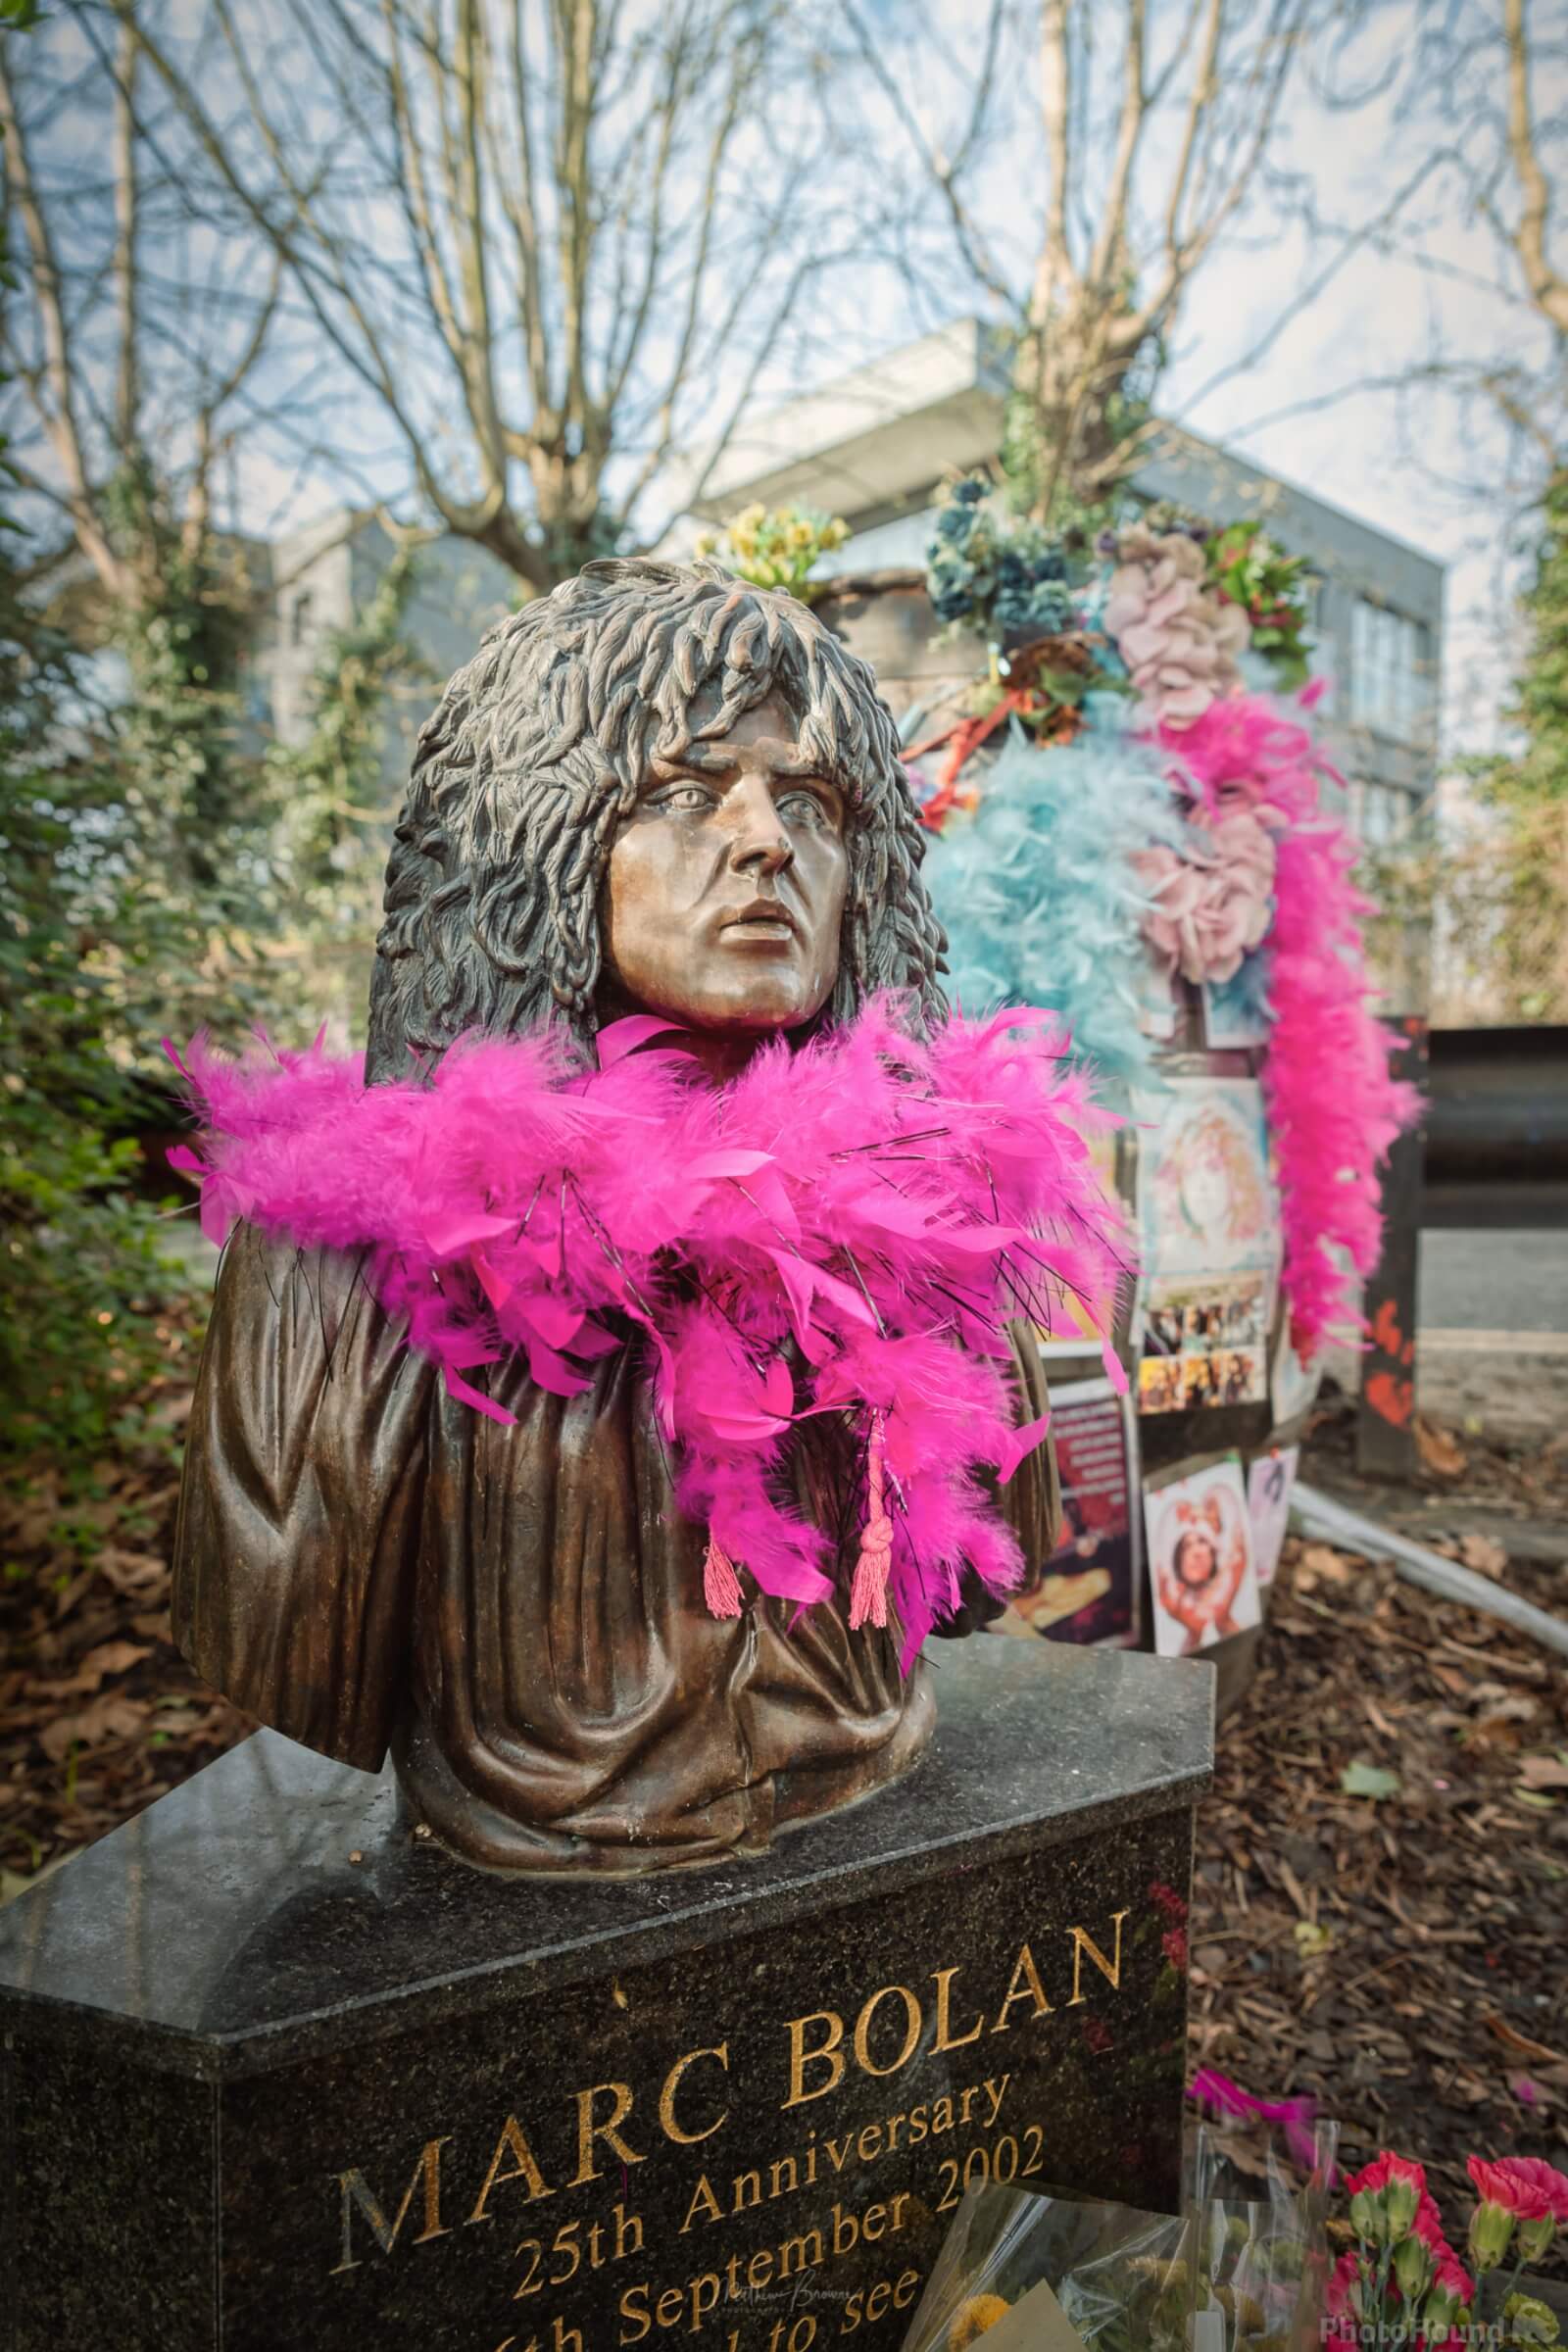 Image of Marc Bolan Shrine by Mathew Browne